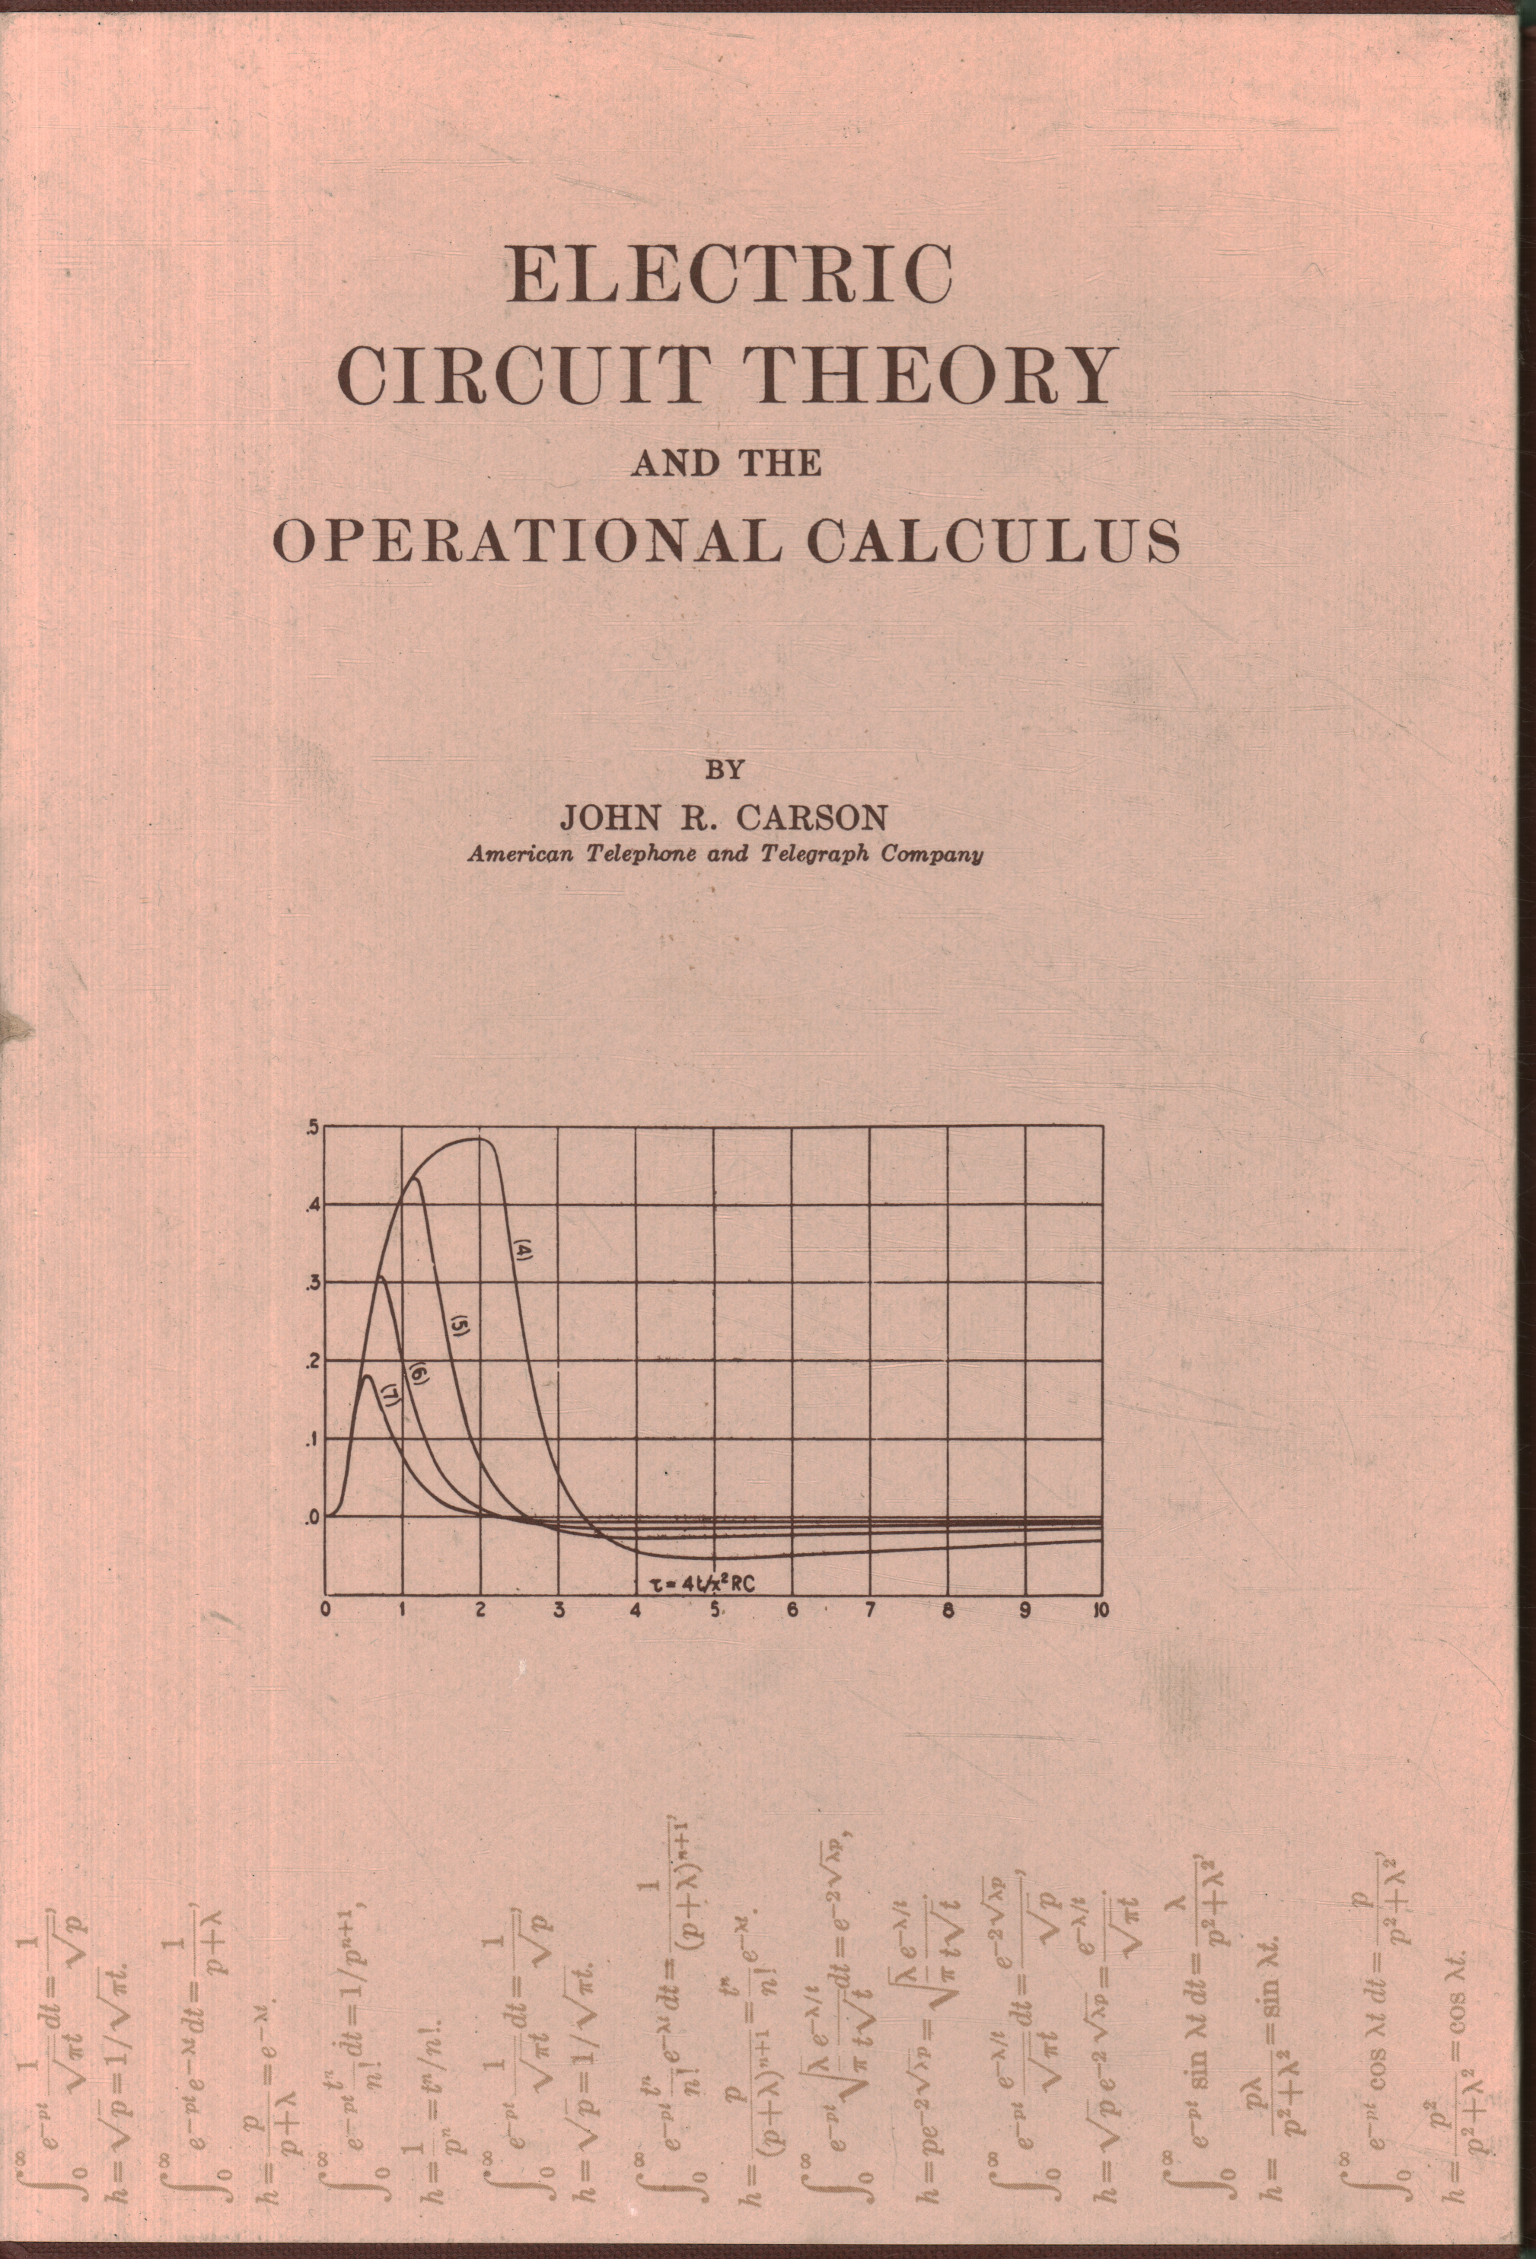 Electric Circuit Theory and the Operatio